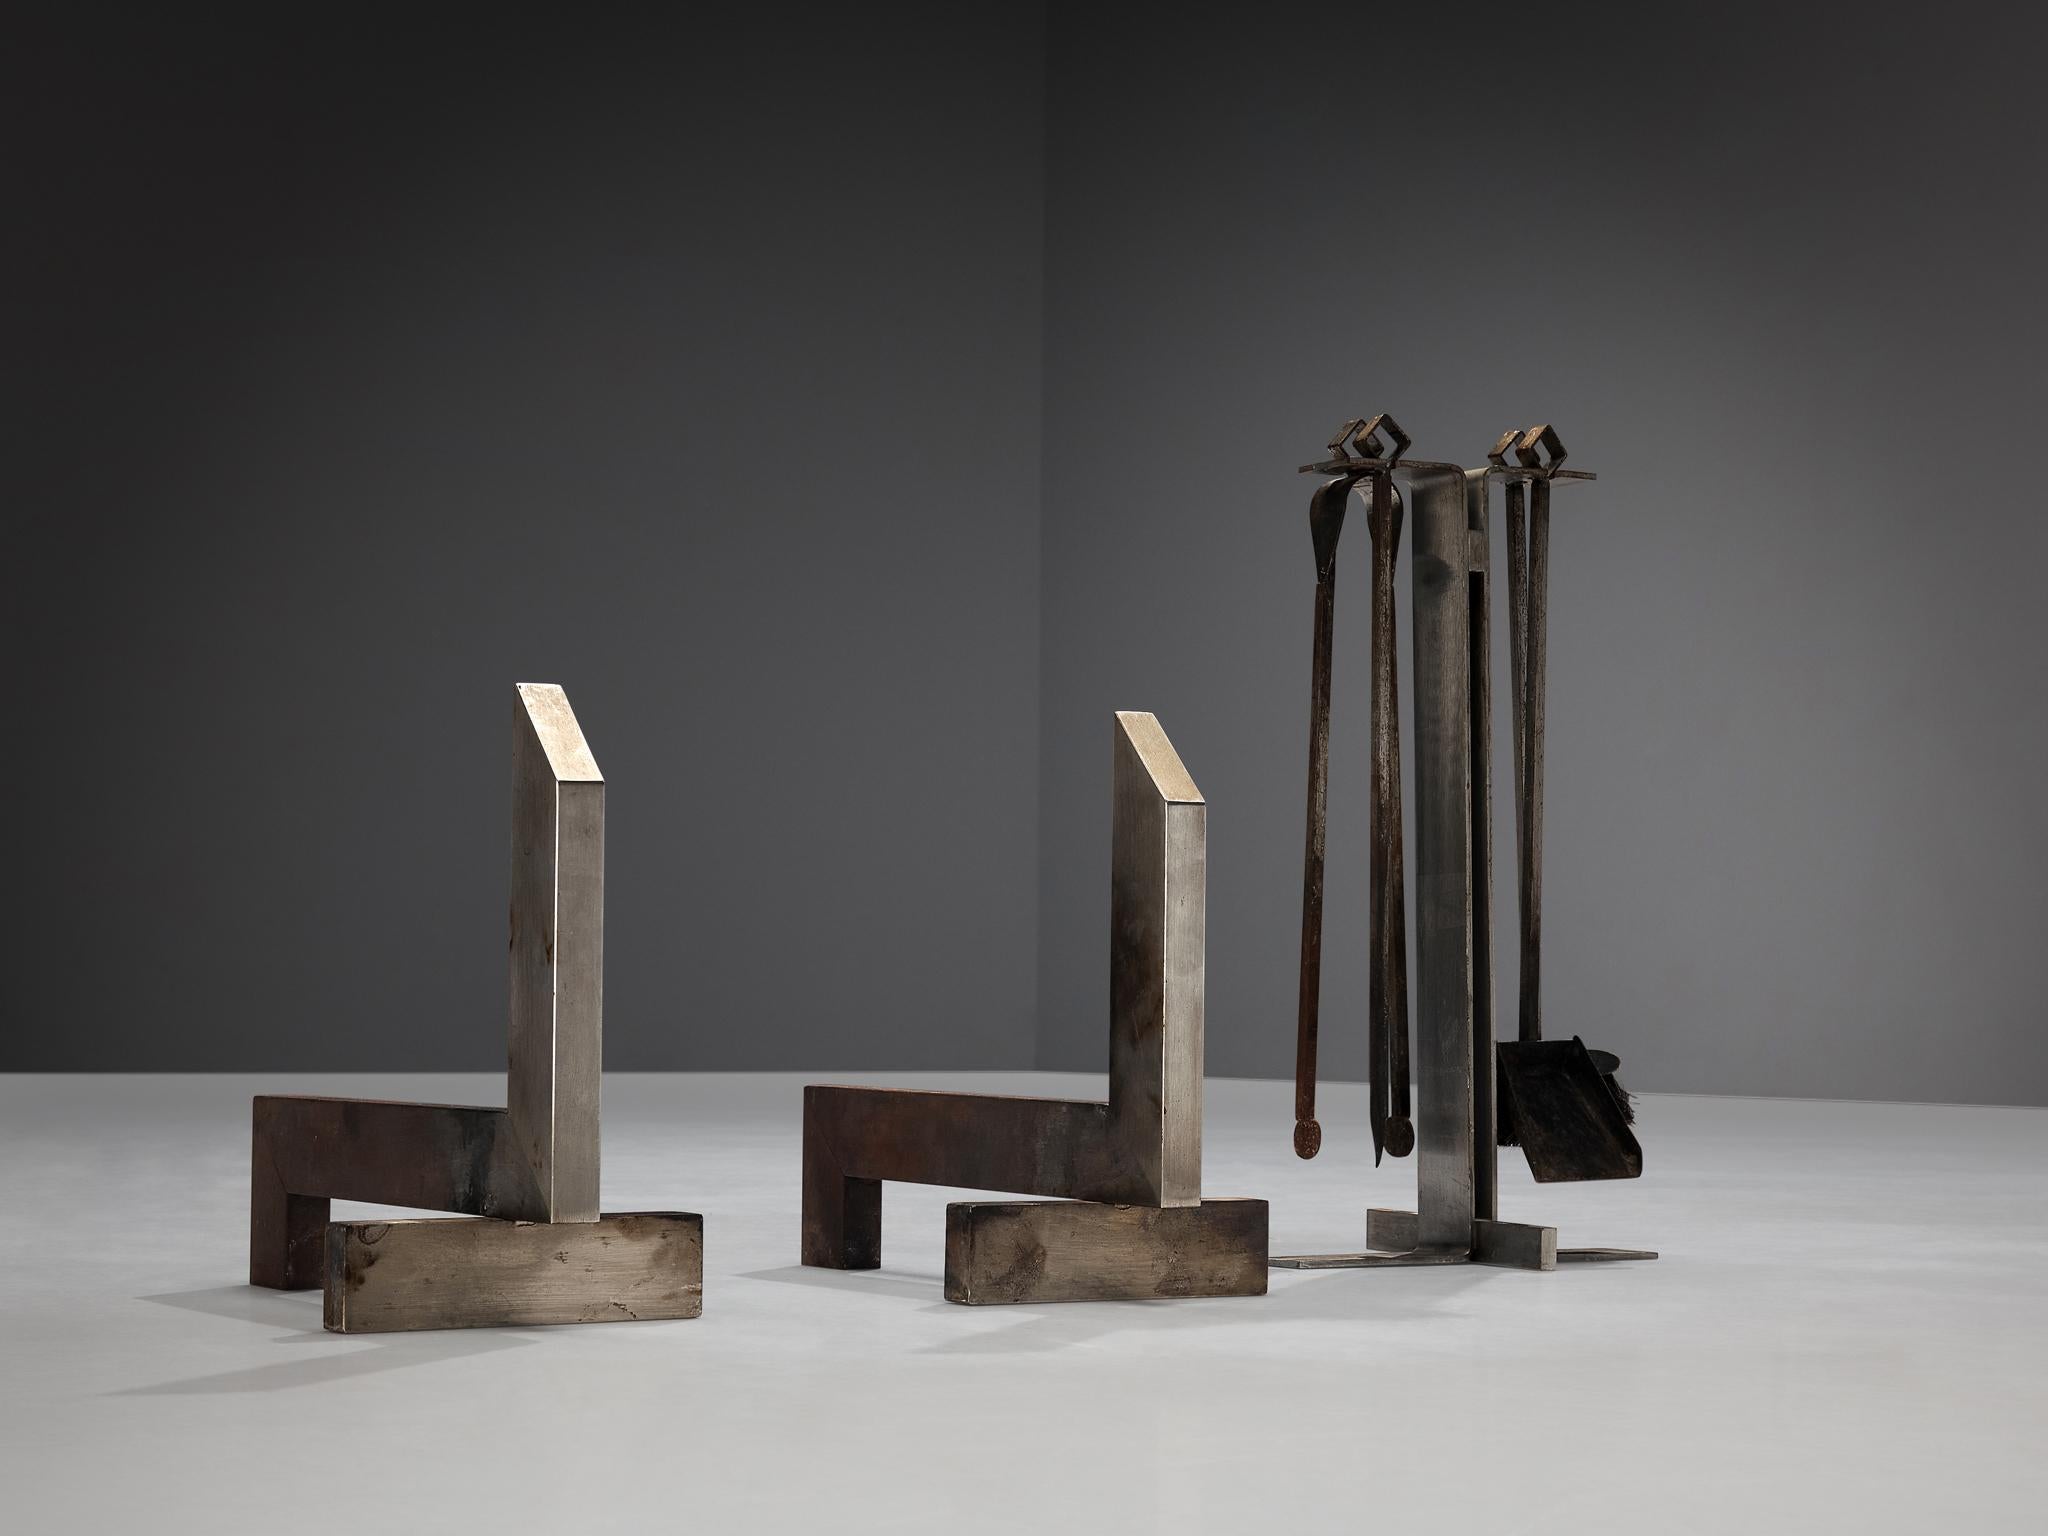 Fireplace set, metal, wood, France, 1970s

This fireplace set is based on a minimalistic construction executed in metal. The set consists of different tools. The main stand to hang the additional brush, poker, tong, and shovel. The andirons